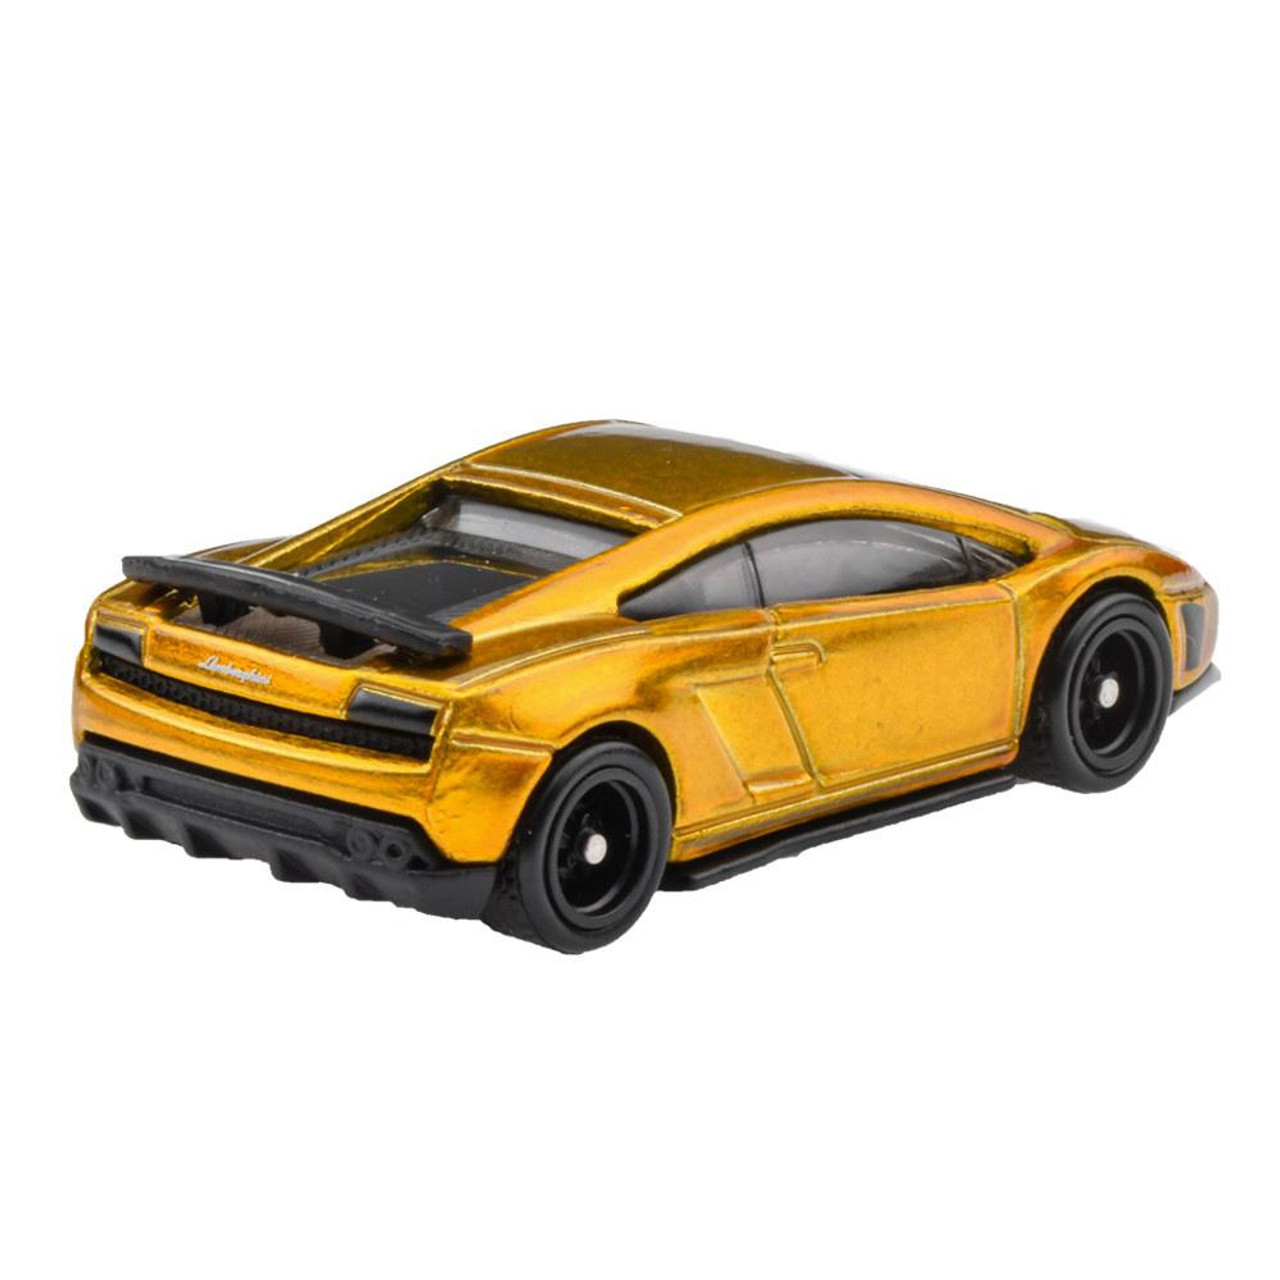 Hot Wheels Fast & Furious 1:64 Scale Die-Cast Vehicle (Styles May Vary)